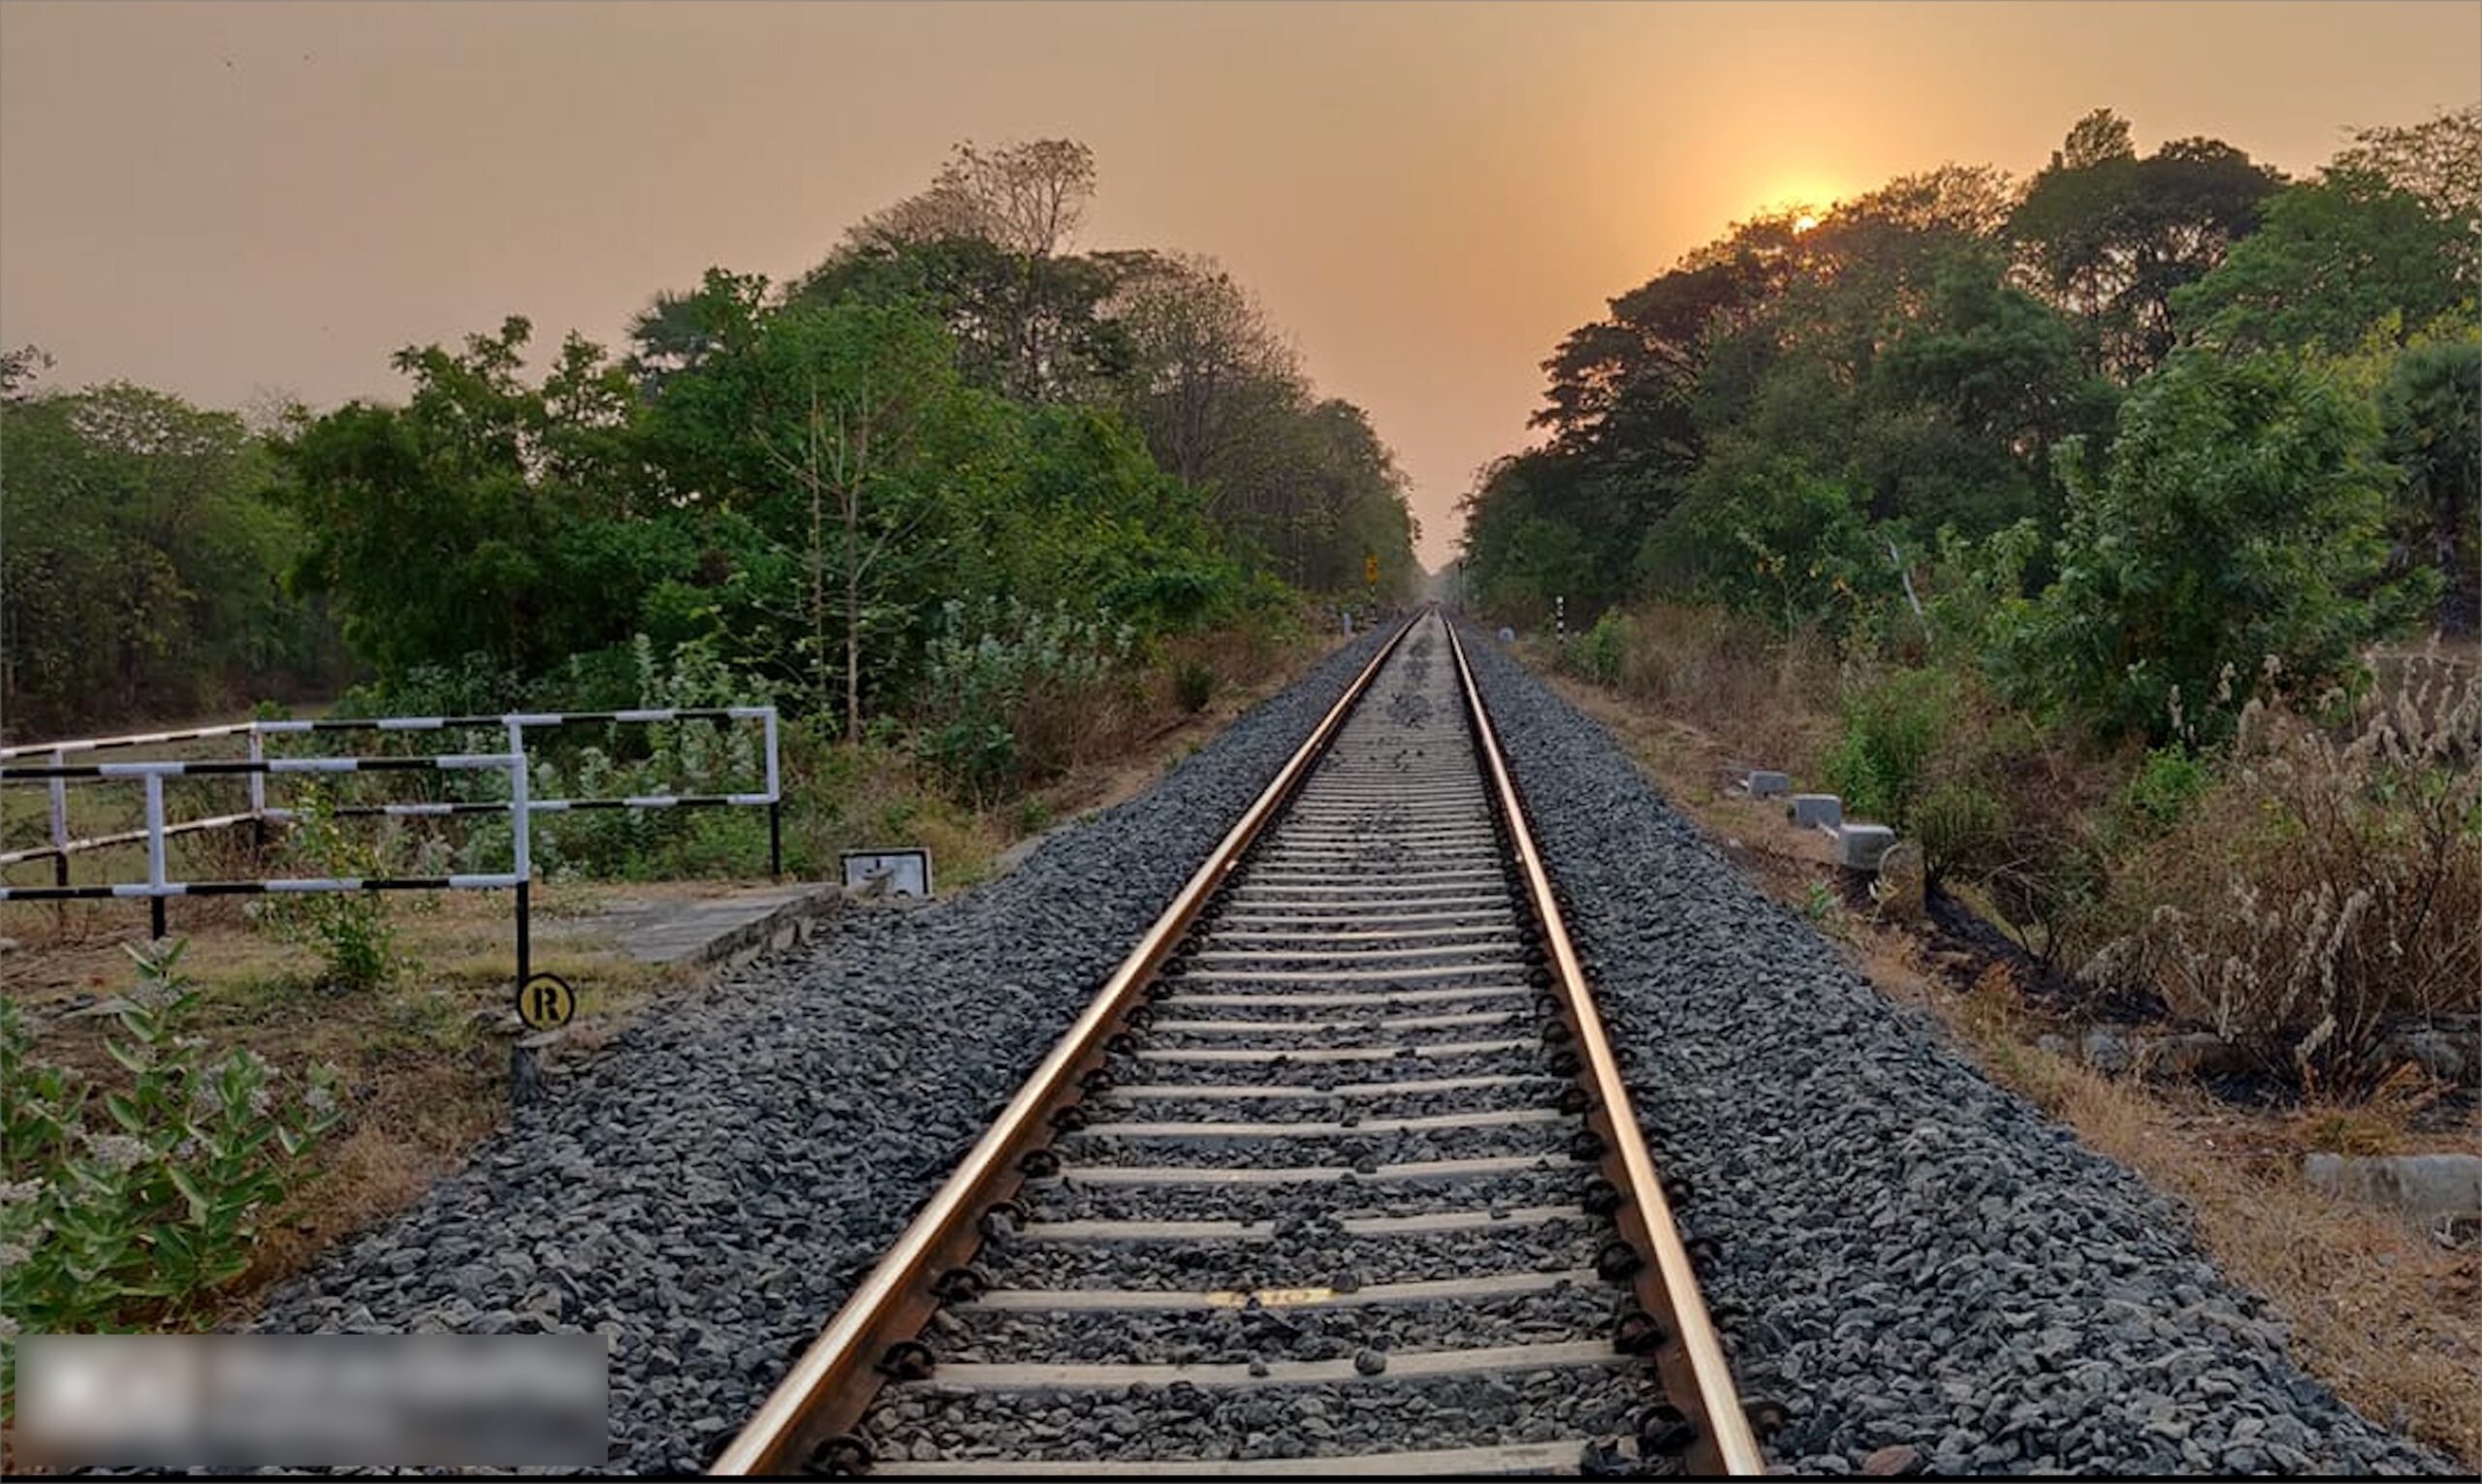 The Indian Railways, spanning over 67,000 kilometers and carrying around 23 million passengers daily, is a monumental network. However, challenges persist. A deep dive into the primary issues and their resolution will give a comprehensive understanding.